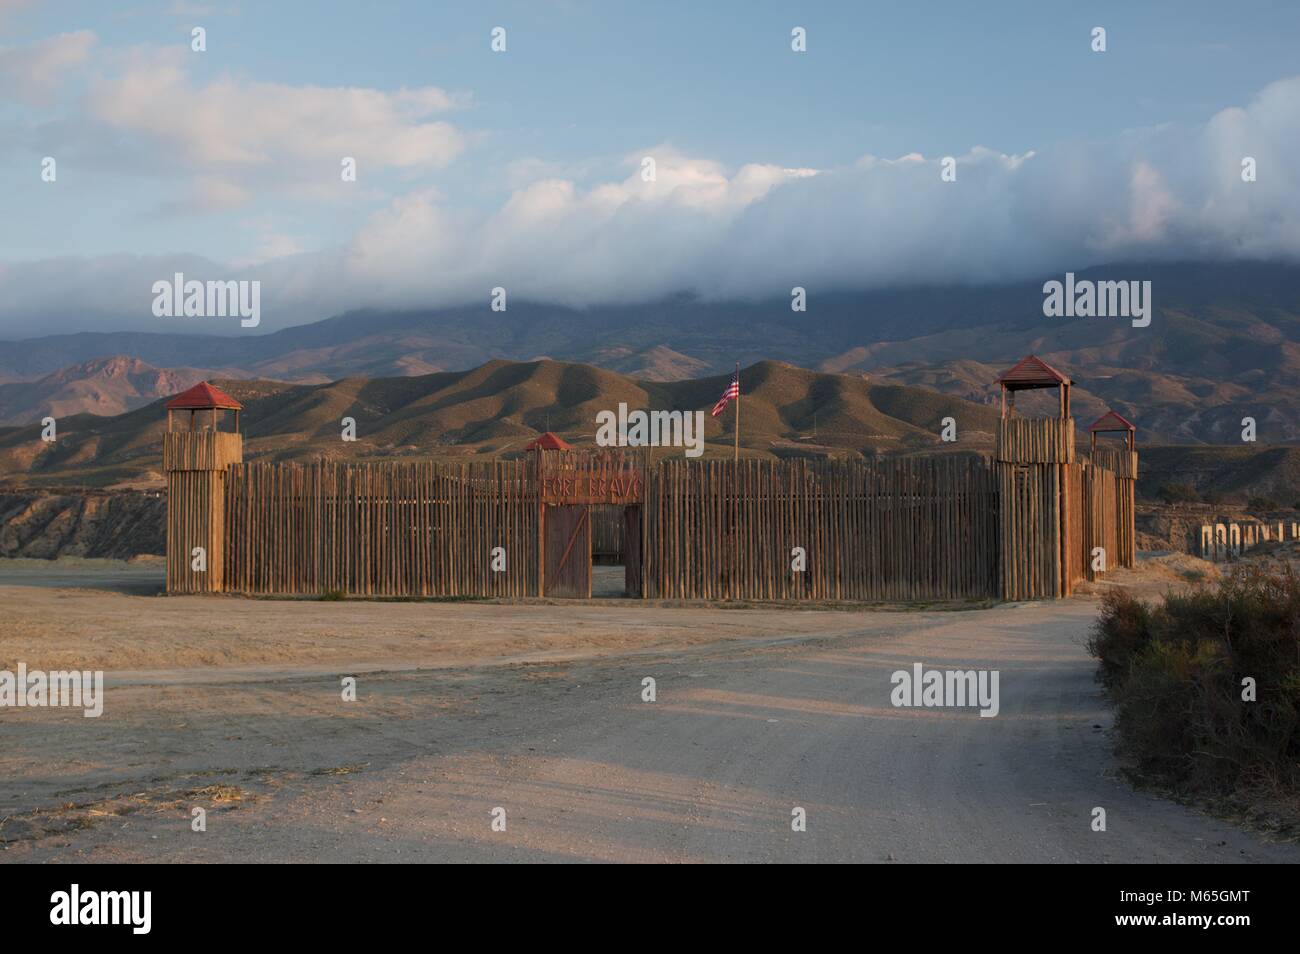 Sets of the Fort Bravo Texas Hollywood film location, Tabernas Spain. Stock Photo